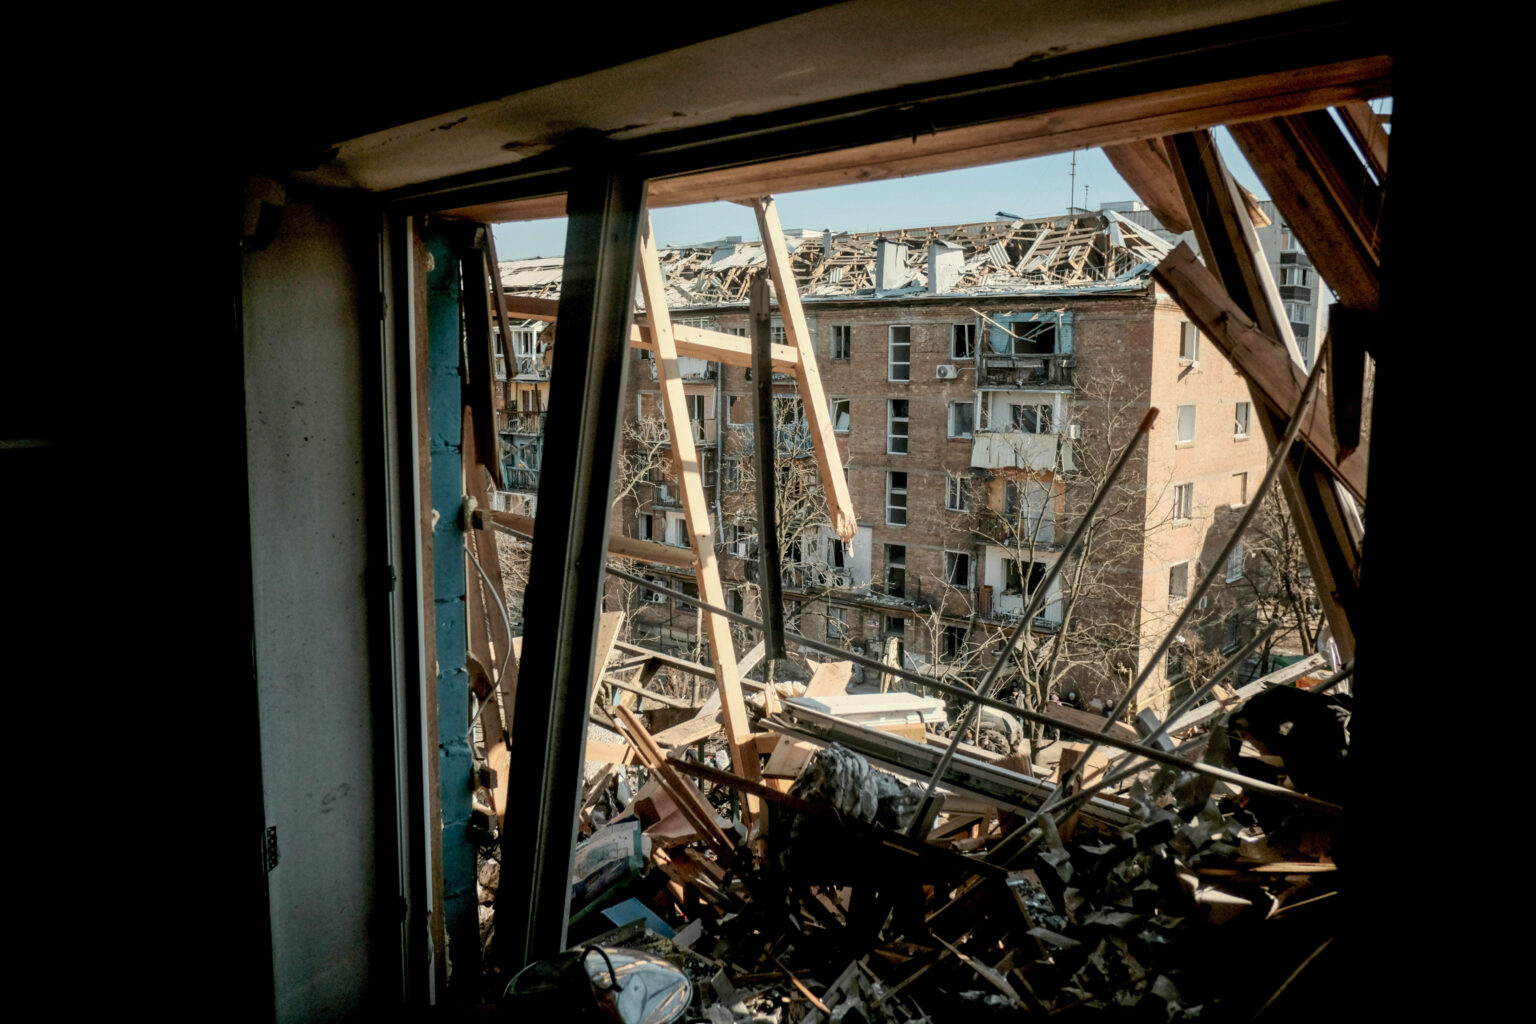 IMAGO / ZUMA Wire / Matthew Hatcher. March 19, 2022, Kyiv, Ukraine: A view of a destroyed apartment building following a Russian air strike in the residential neighborhood of Podil in Kyiv.